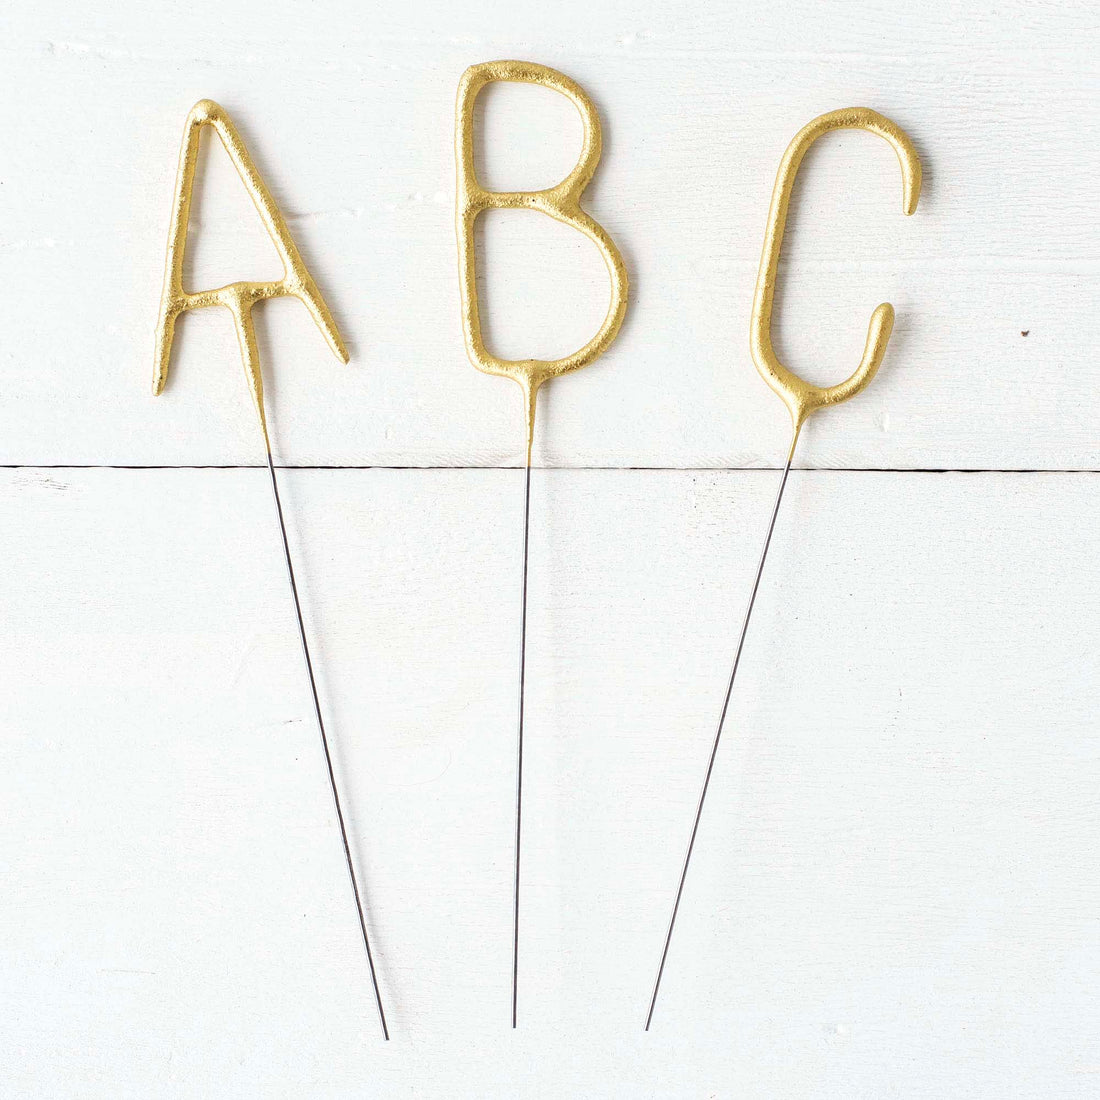 Three Tops Malibu gold Letter Sparklers on a wooden surface.